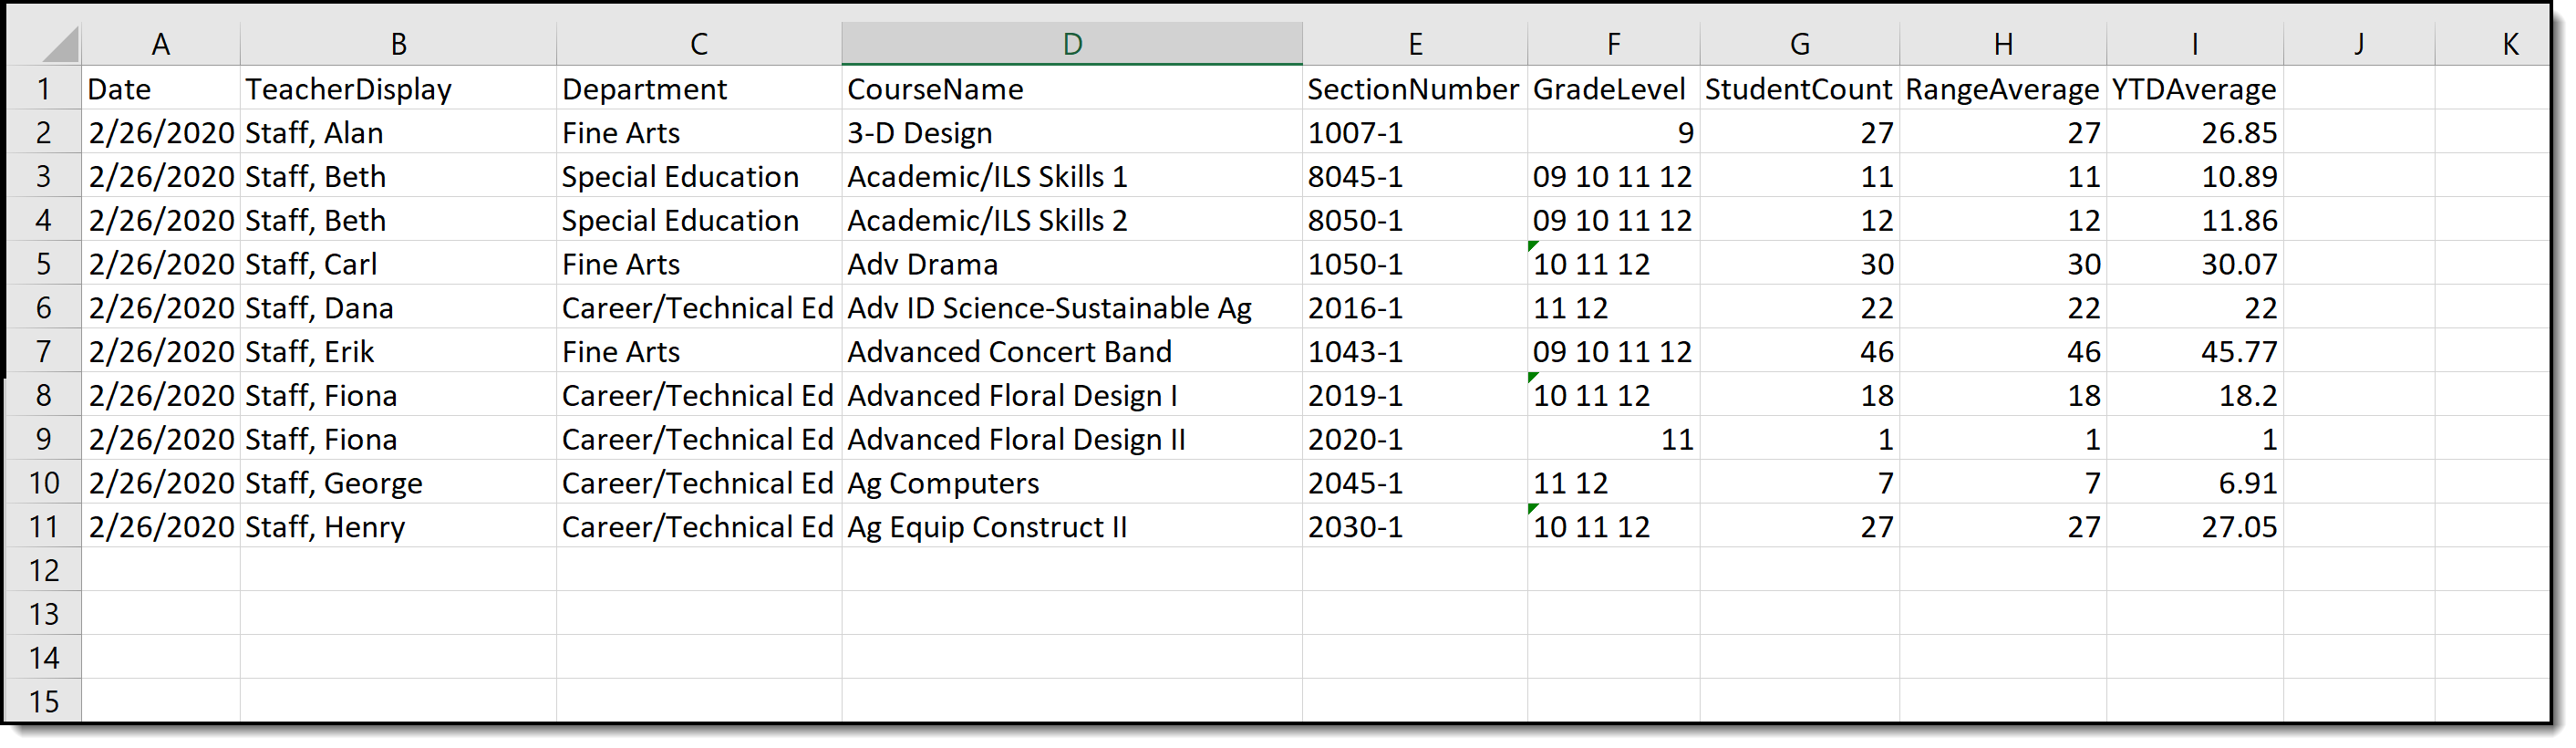 Screenshot of an example of the Class Size Average (K-12) report in CSV format. 